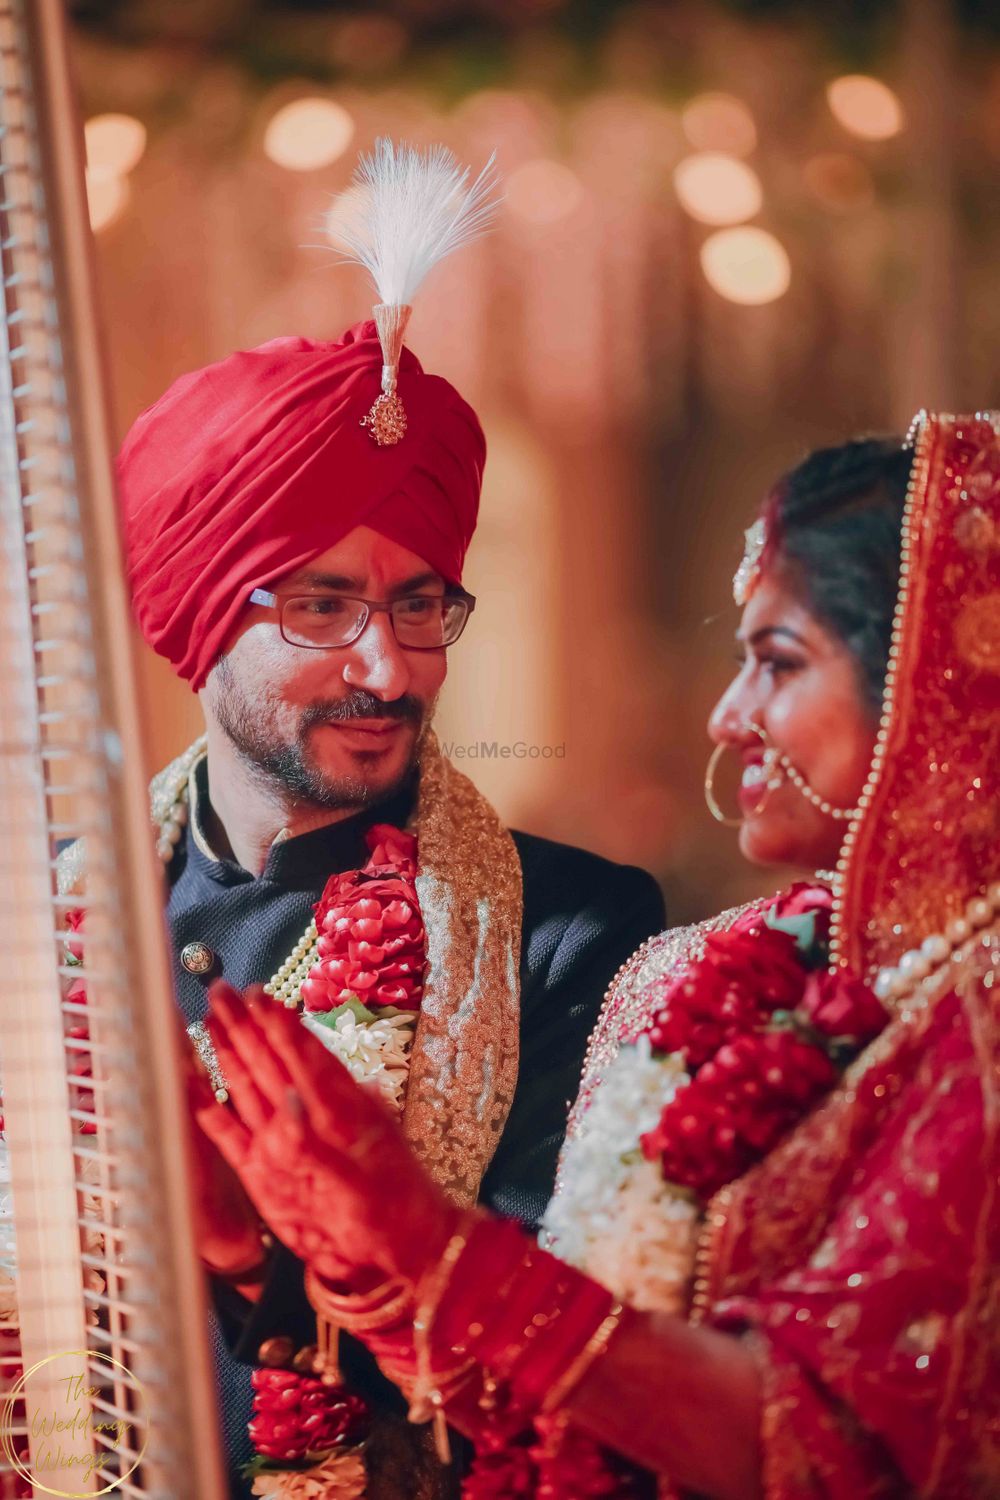 Photo From Aditi Sukhmeet - By The Wedding Wings